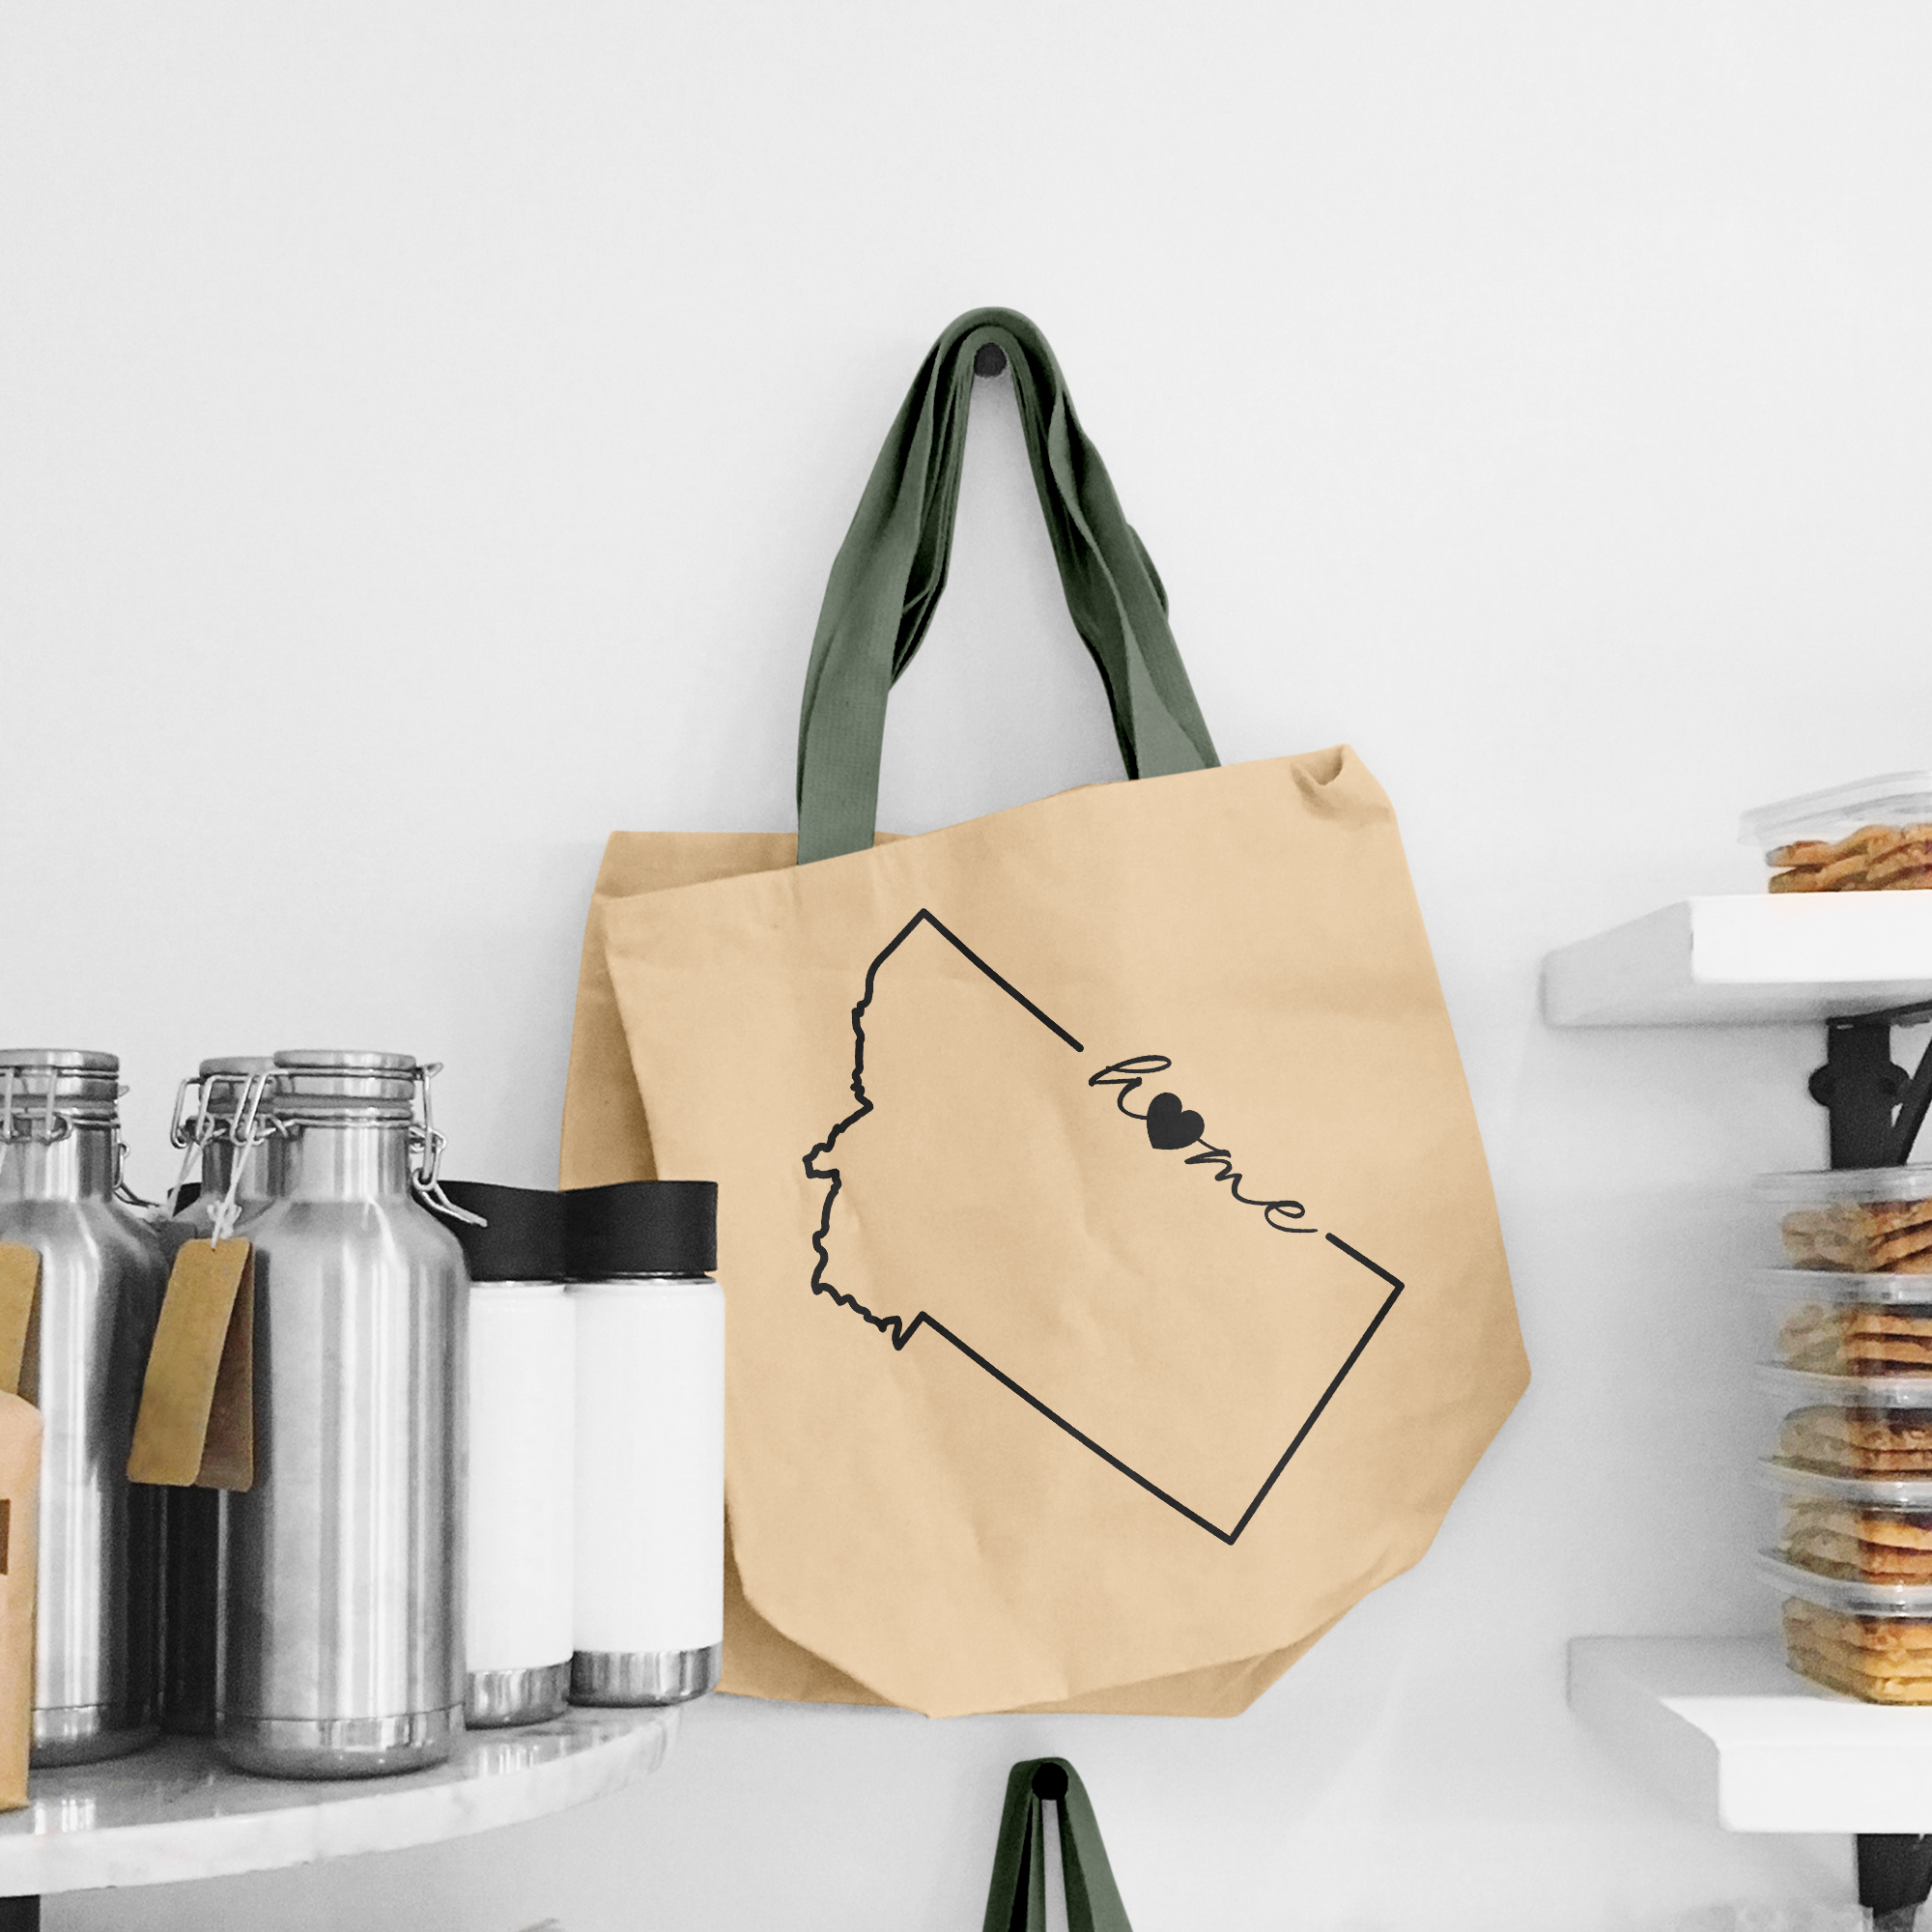 Black illustration of map of Montana on the beige shopping bag with dirty green handle.